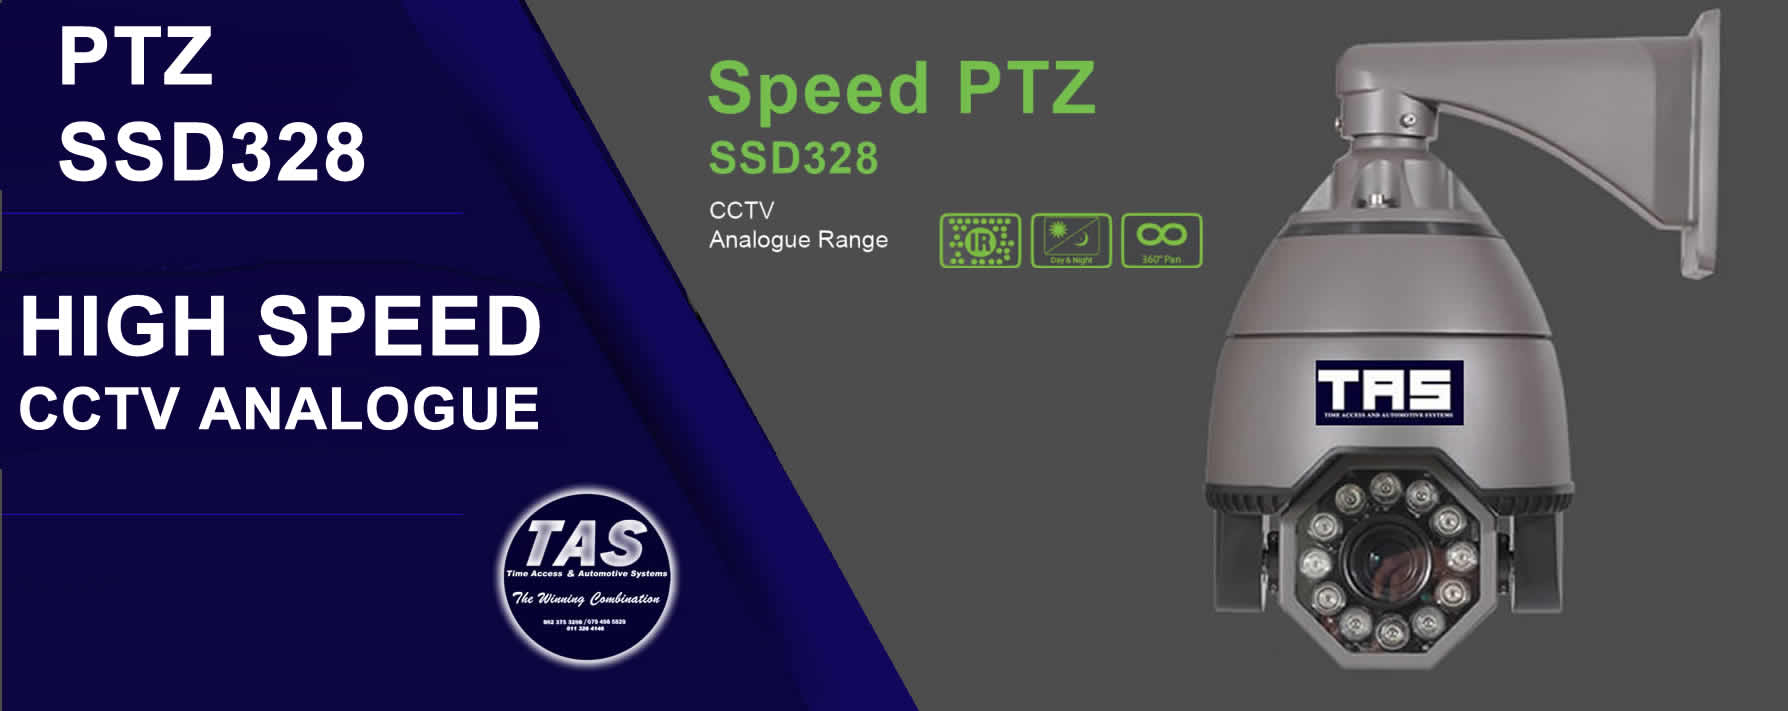 SSD328 CCTV Cameras Analogue SPEED PTZ Range Product - CCTV Analogue security and access control products-banner